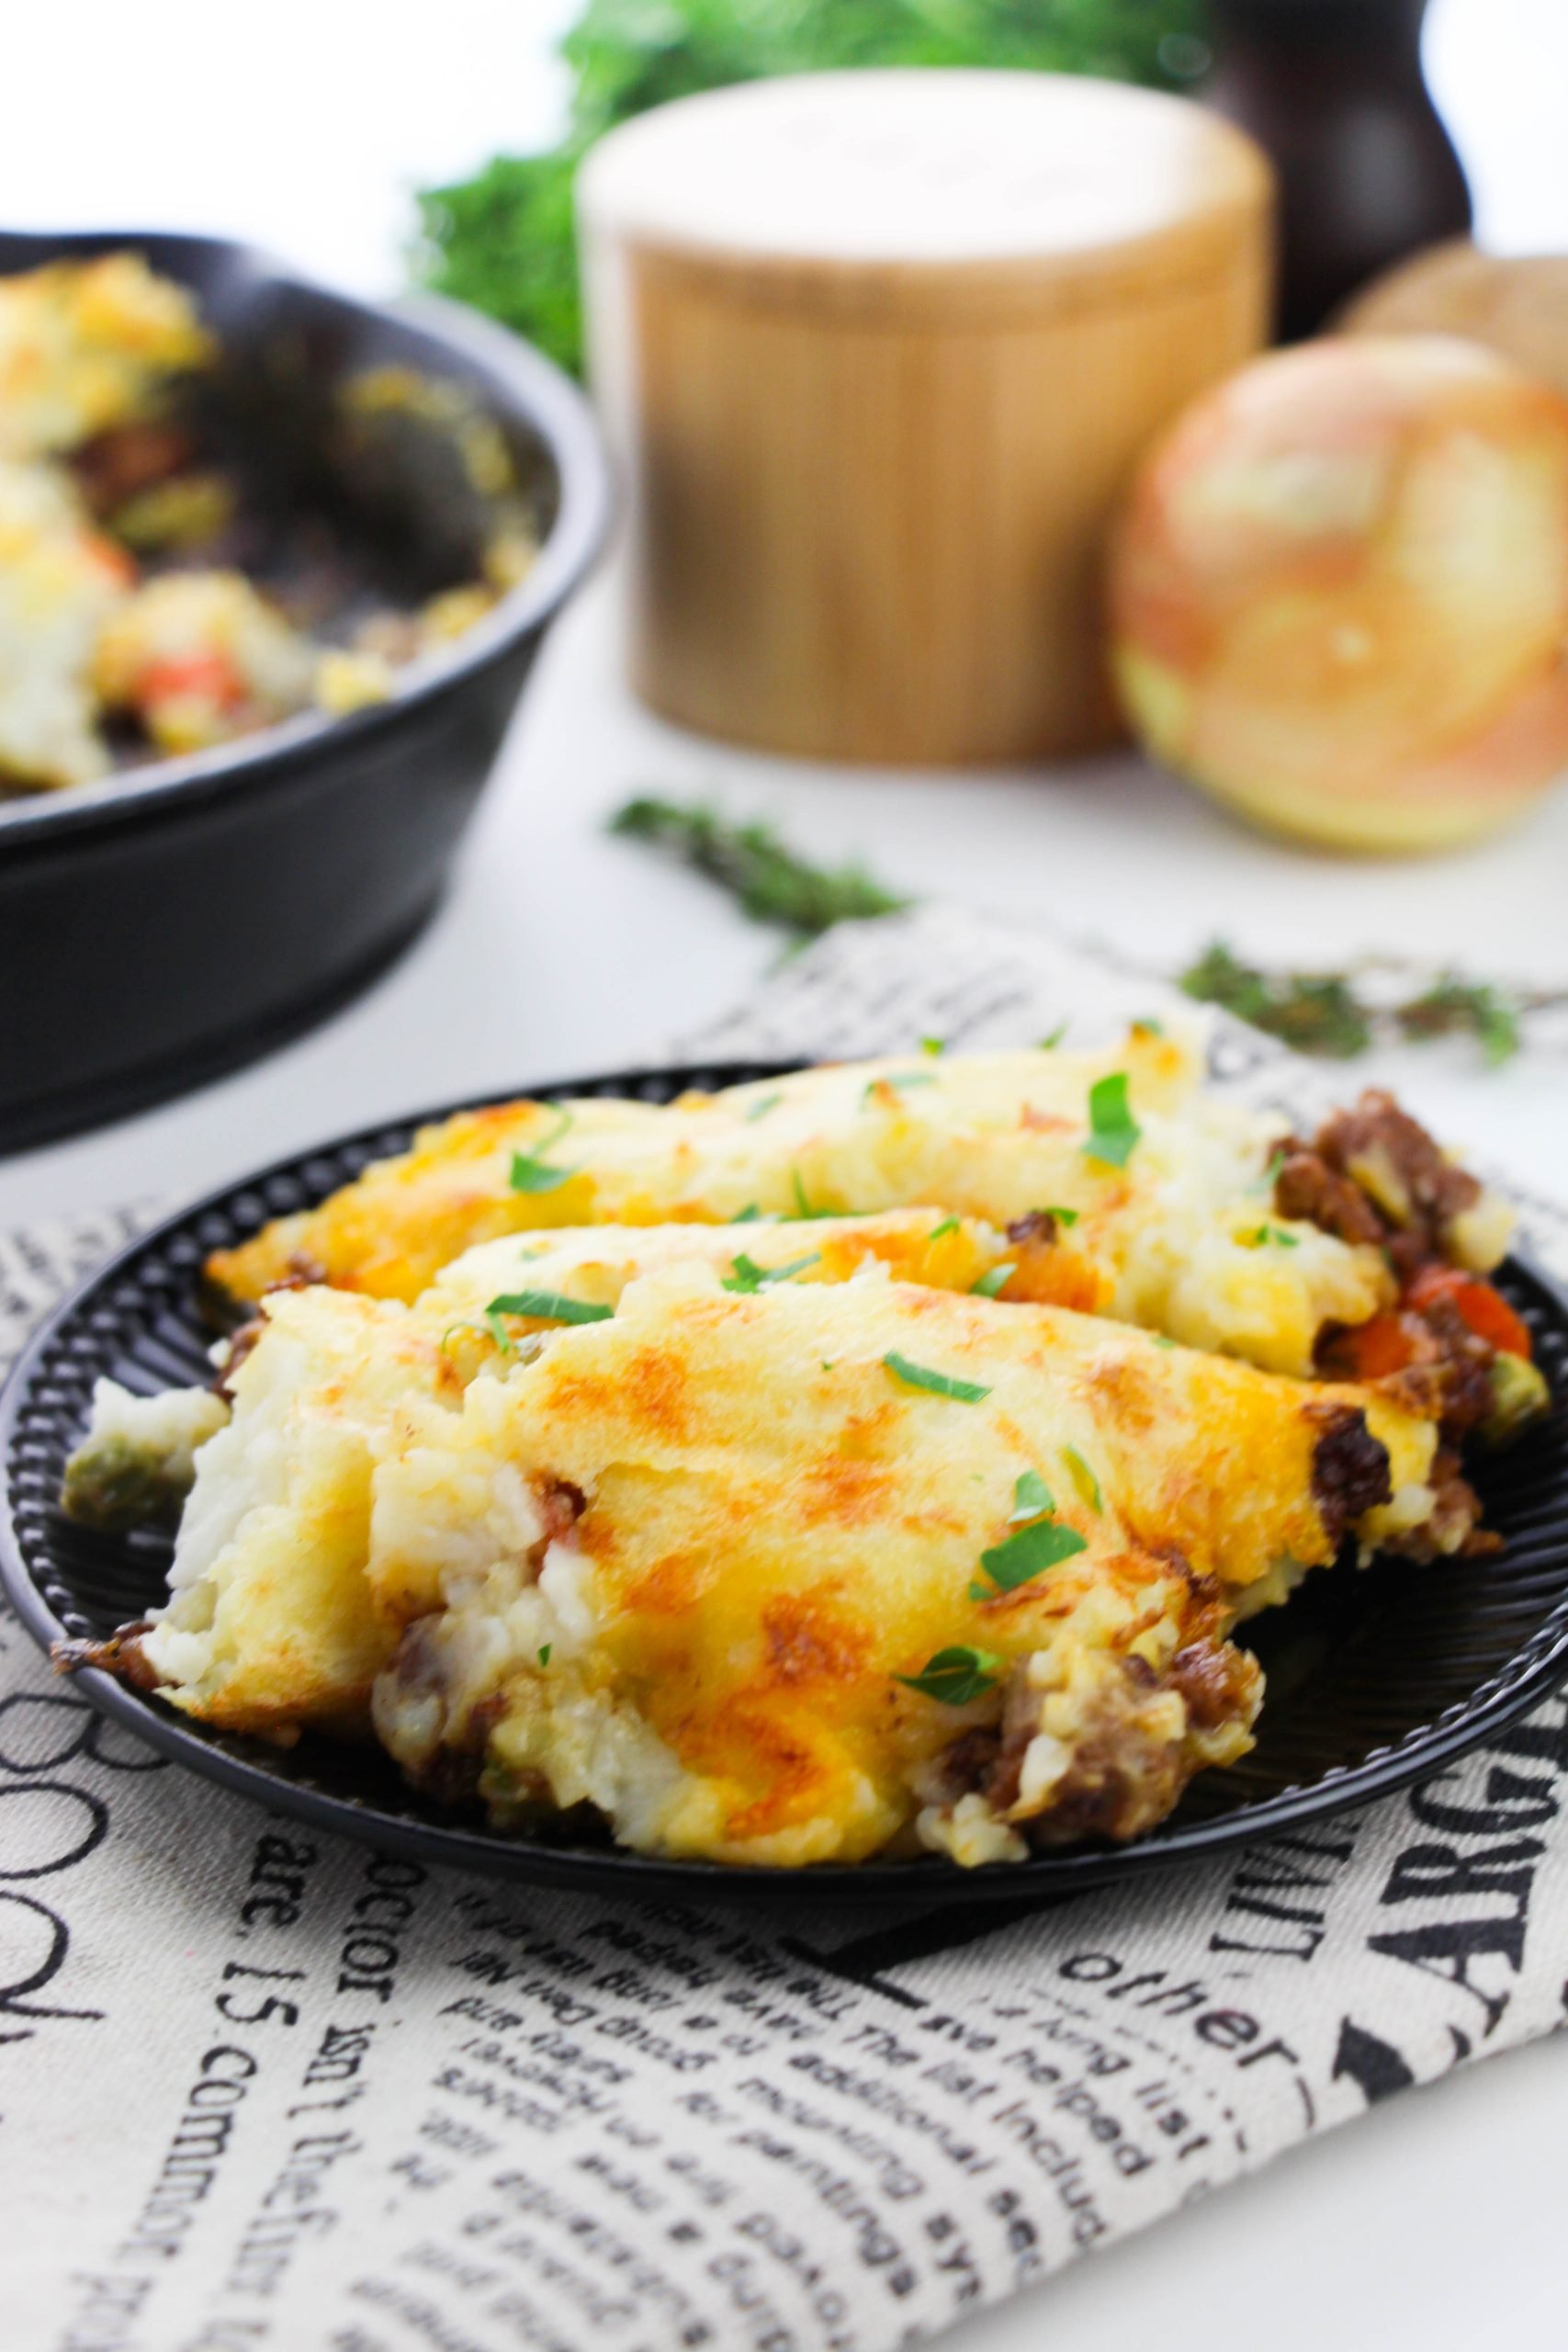 https://campfirefoodie.com/wp-content/uploads/2022/02/shepards-pie-skillet-1-of-1-69-scaled.jpg